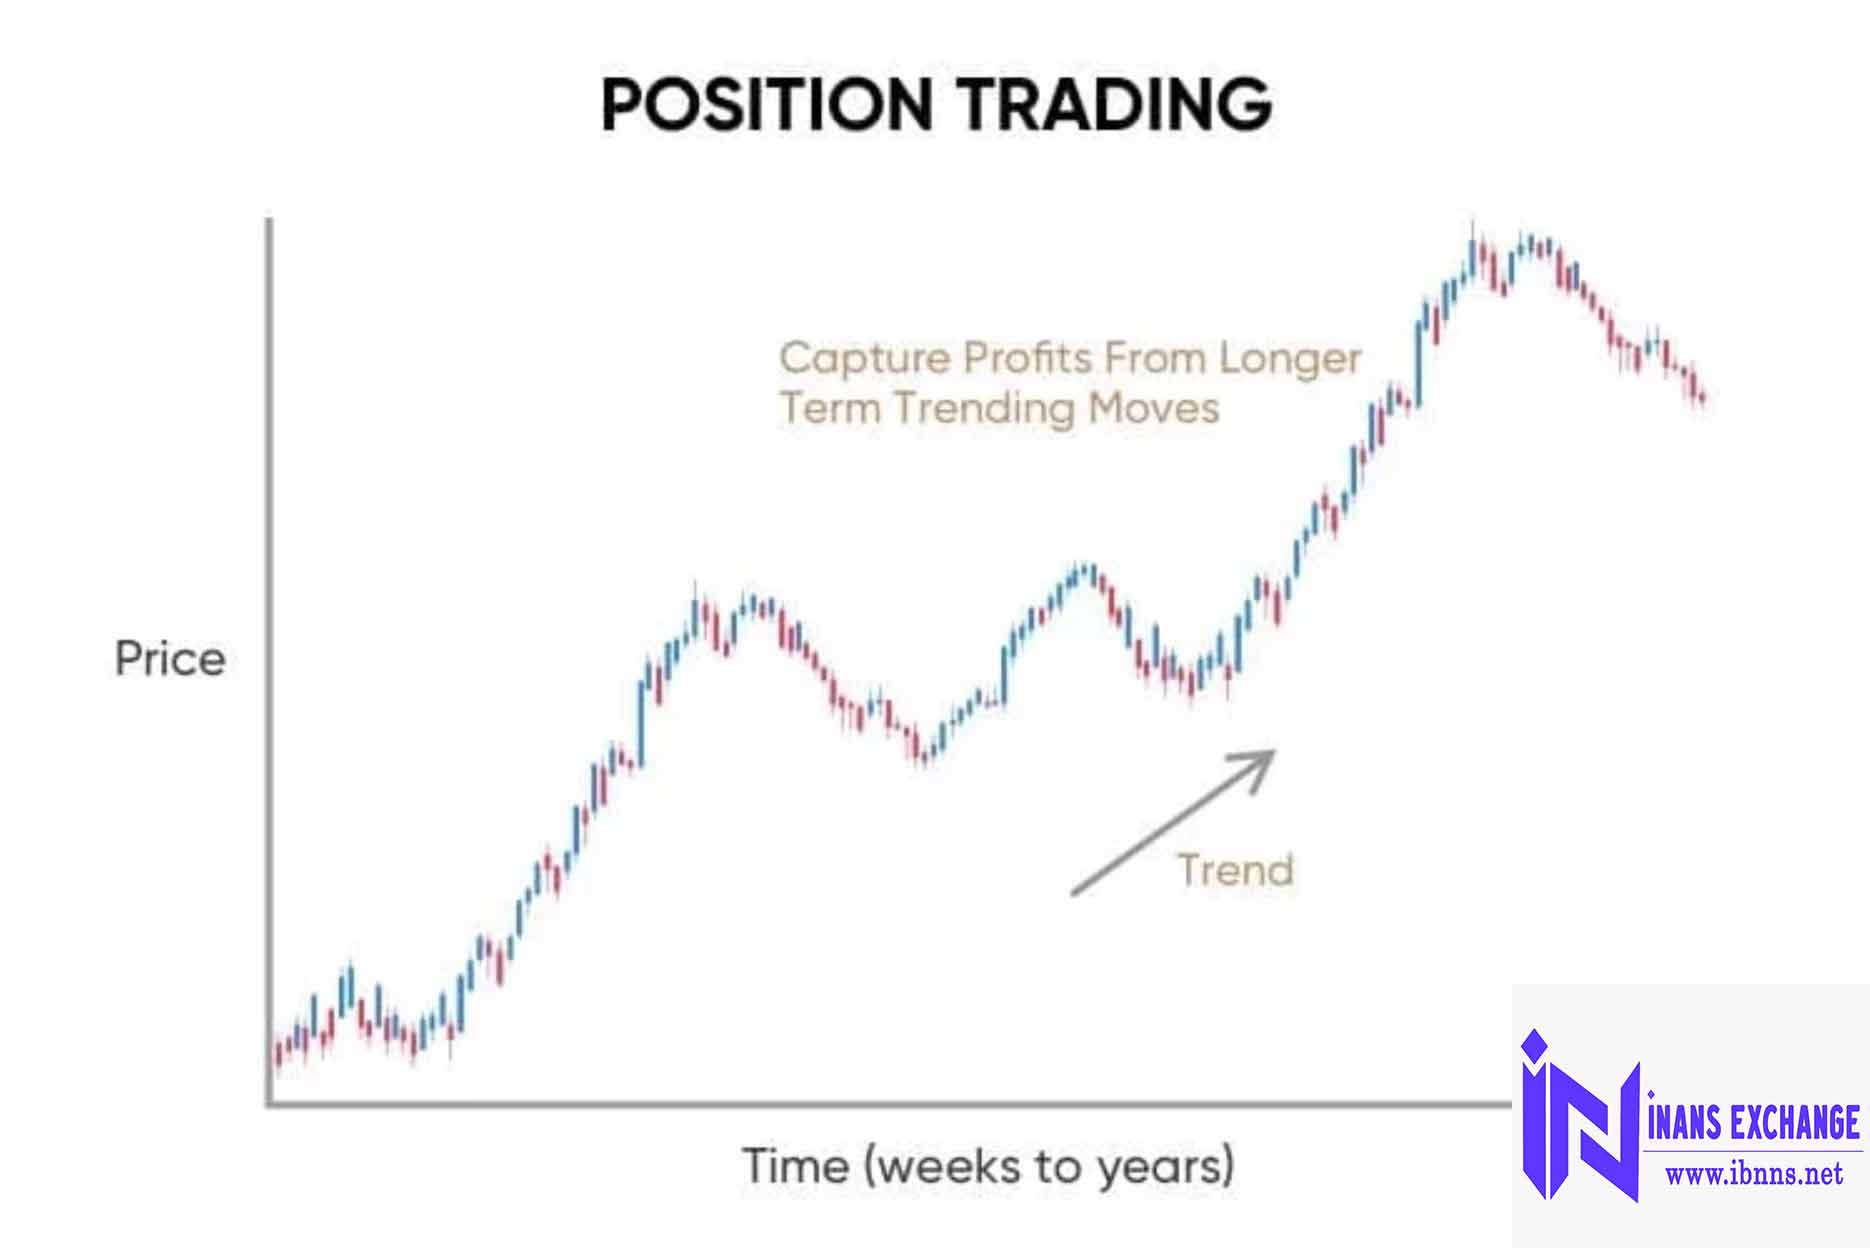 Position Trading